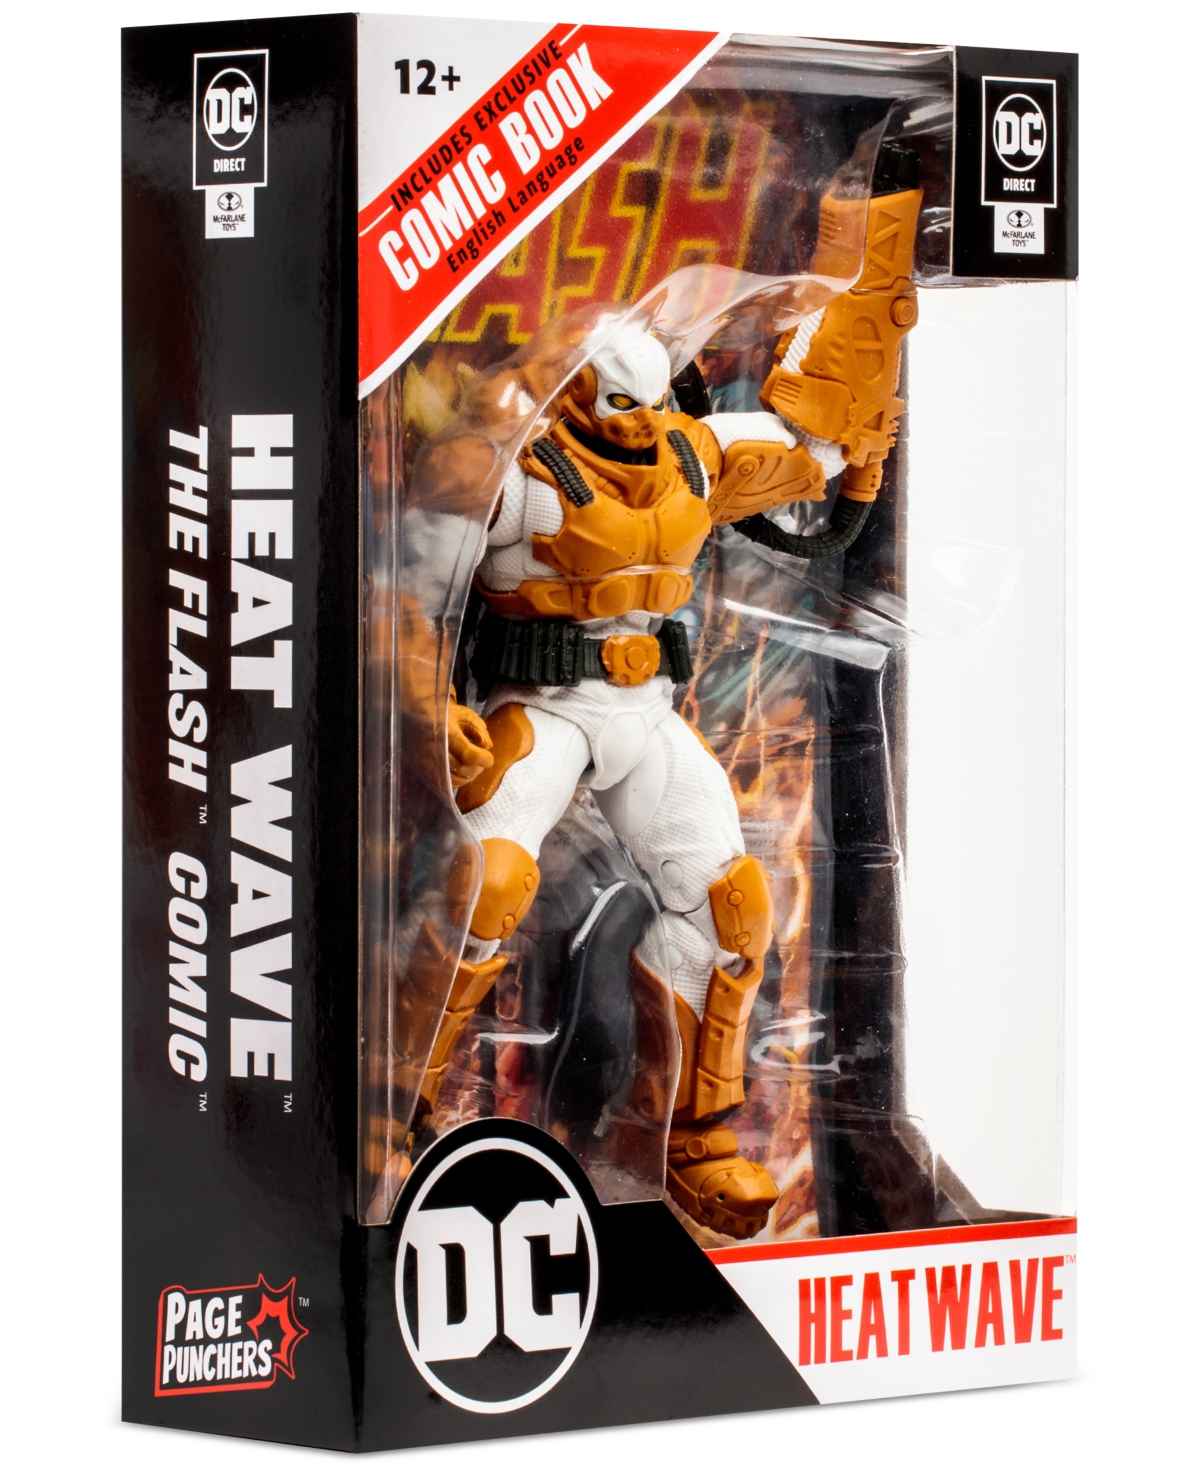 Shop Dc Direct Heat Wave 7" Collectible Figure In No Color